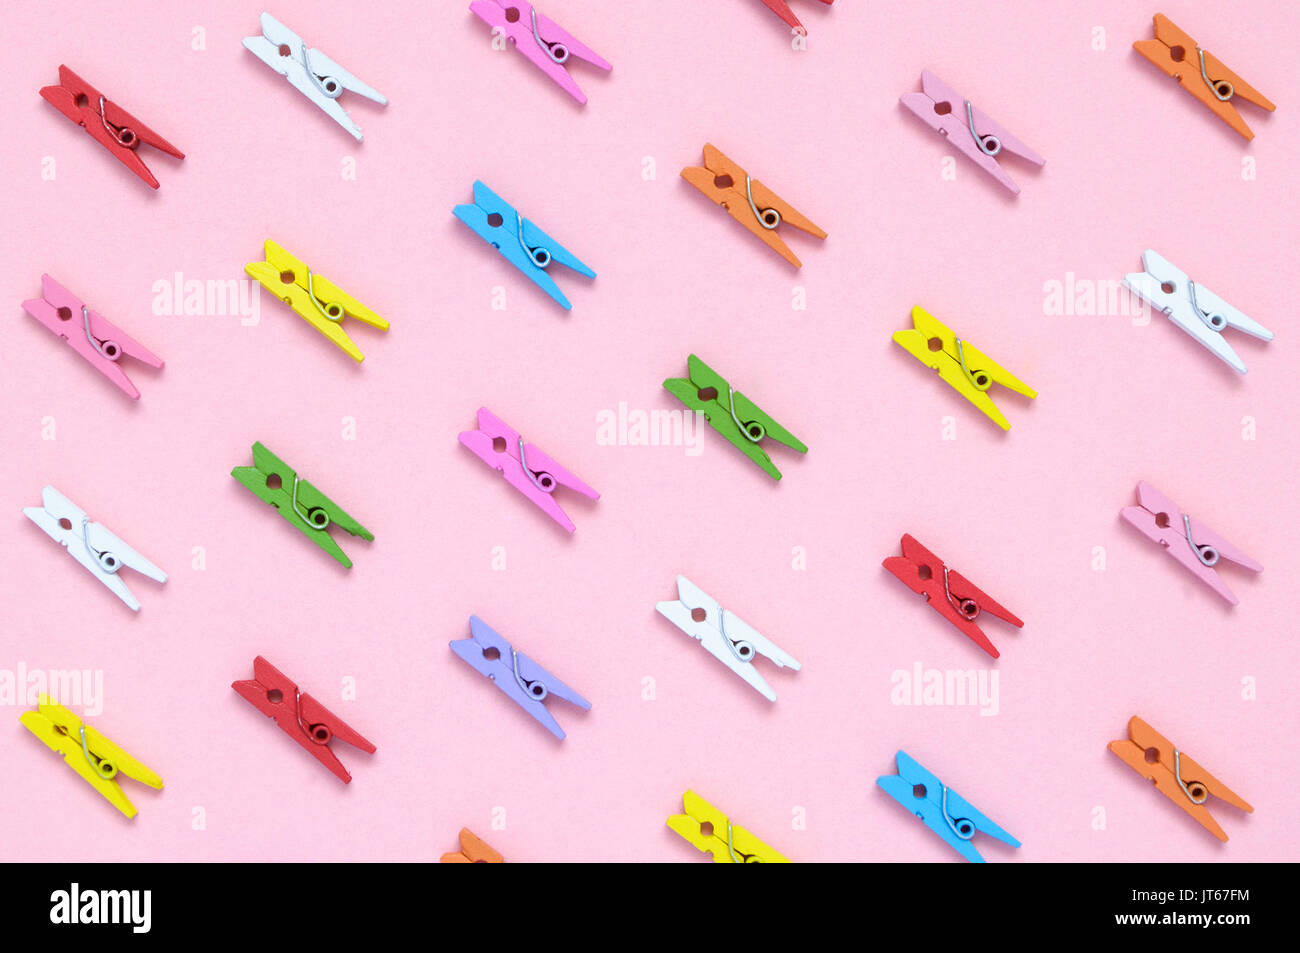 Colorful wooden clothespins on pink paper background Stock Photo